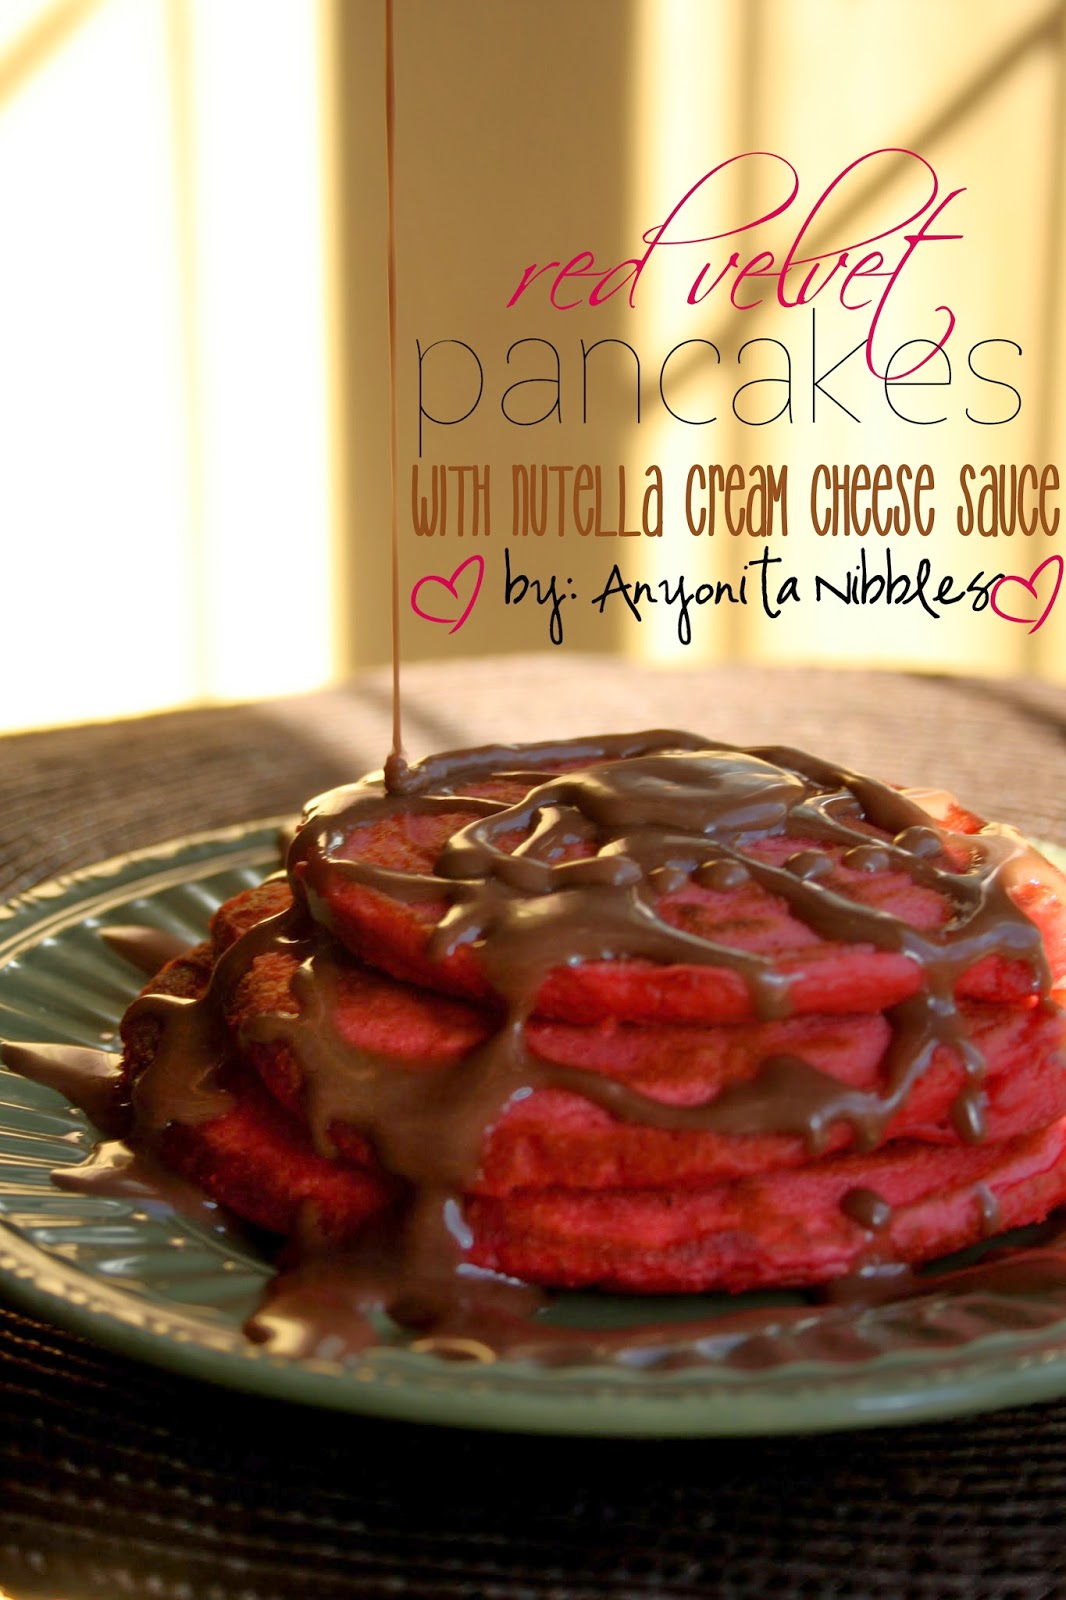 Valentine's Day Red Velvet Pancakes with Nutella Cream Cheese Sauce from www.anyonita-nibbles.com